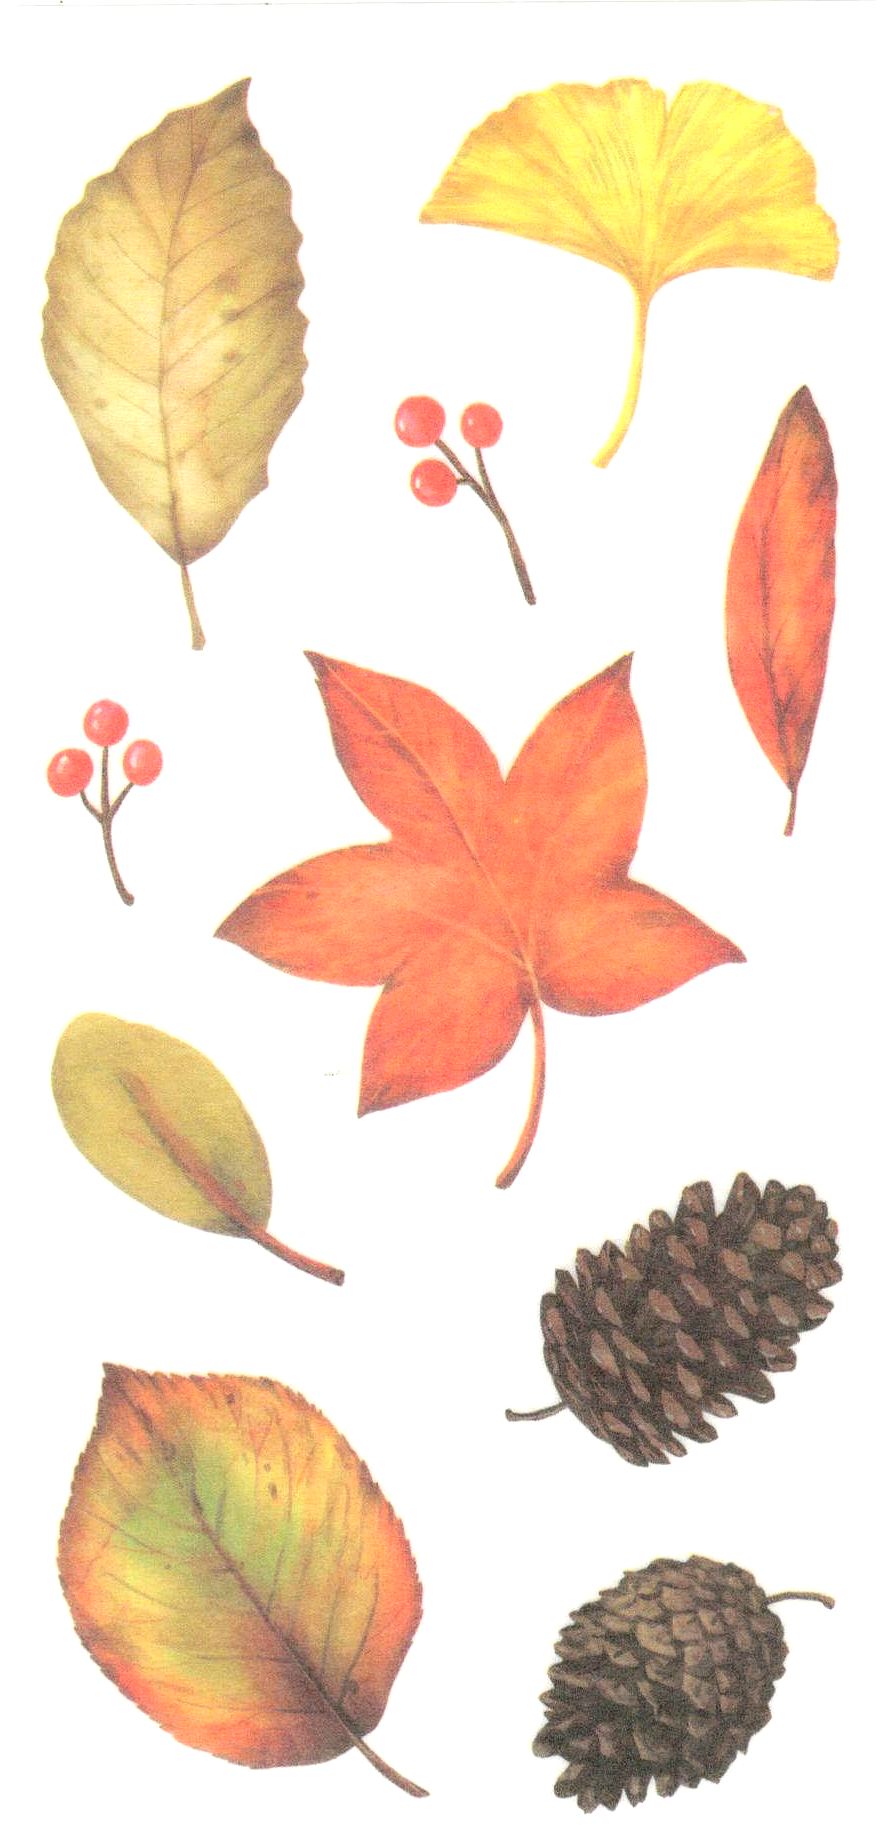 Stickers Puffies - Feuilles d'automne